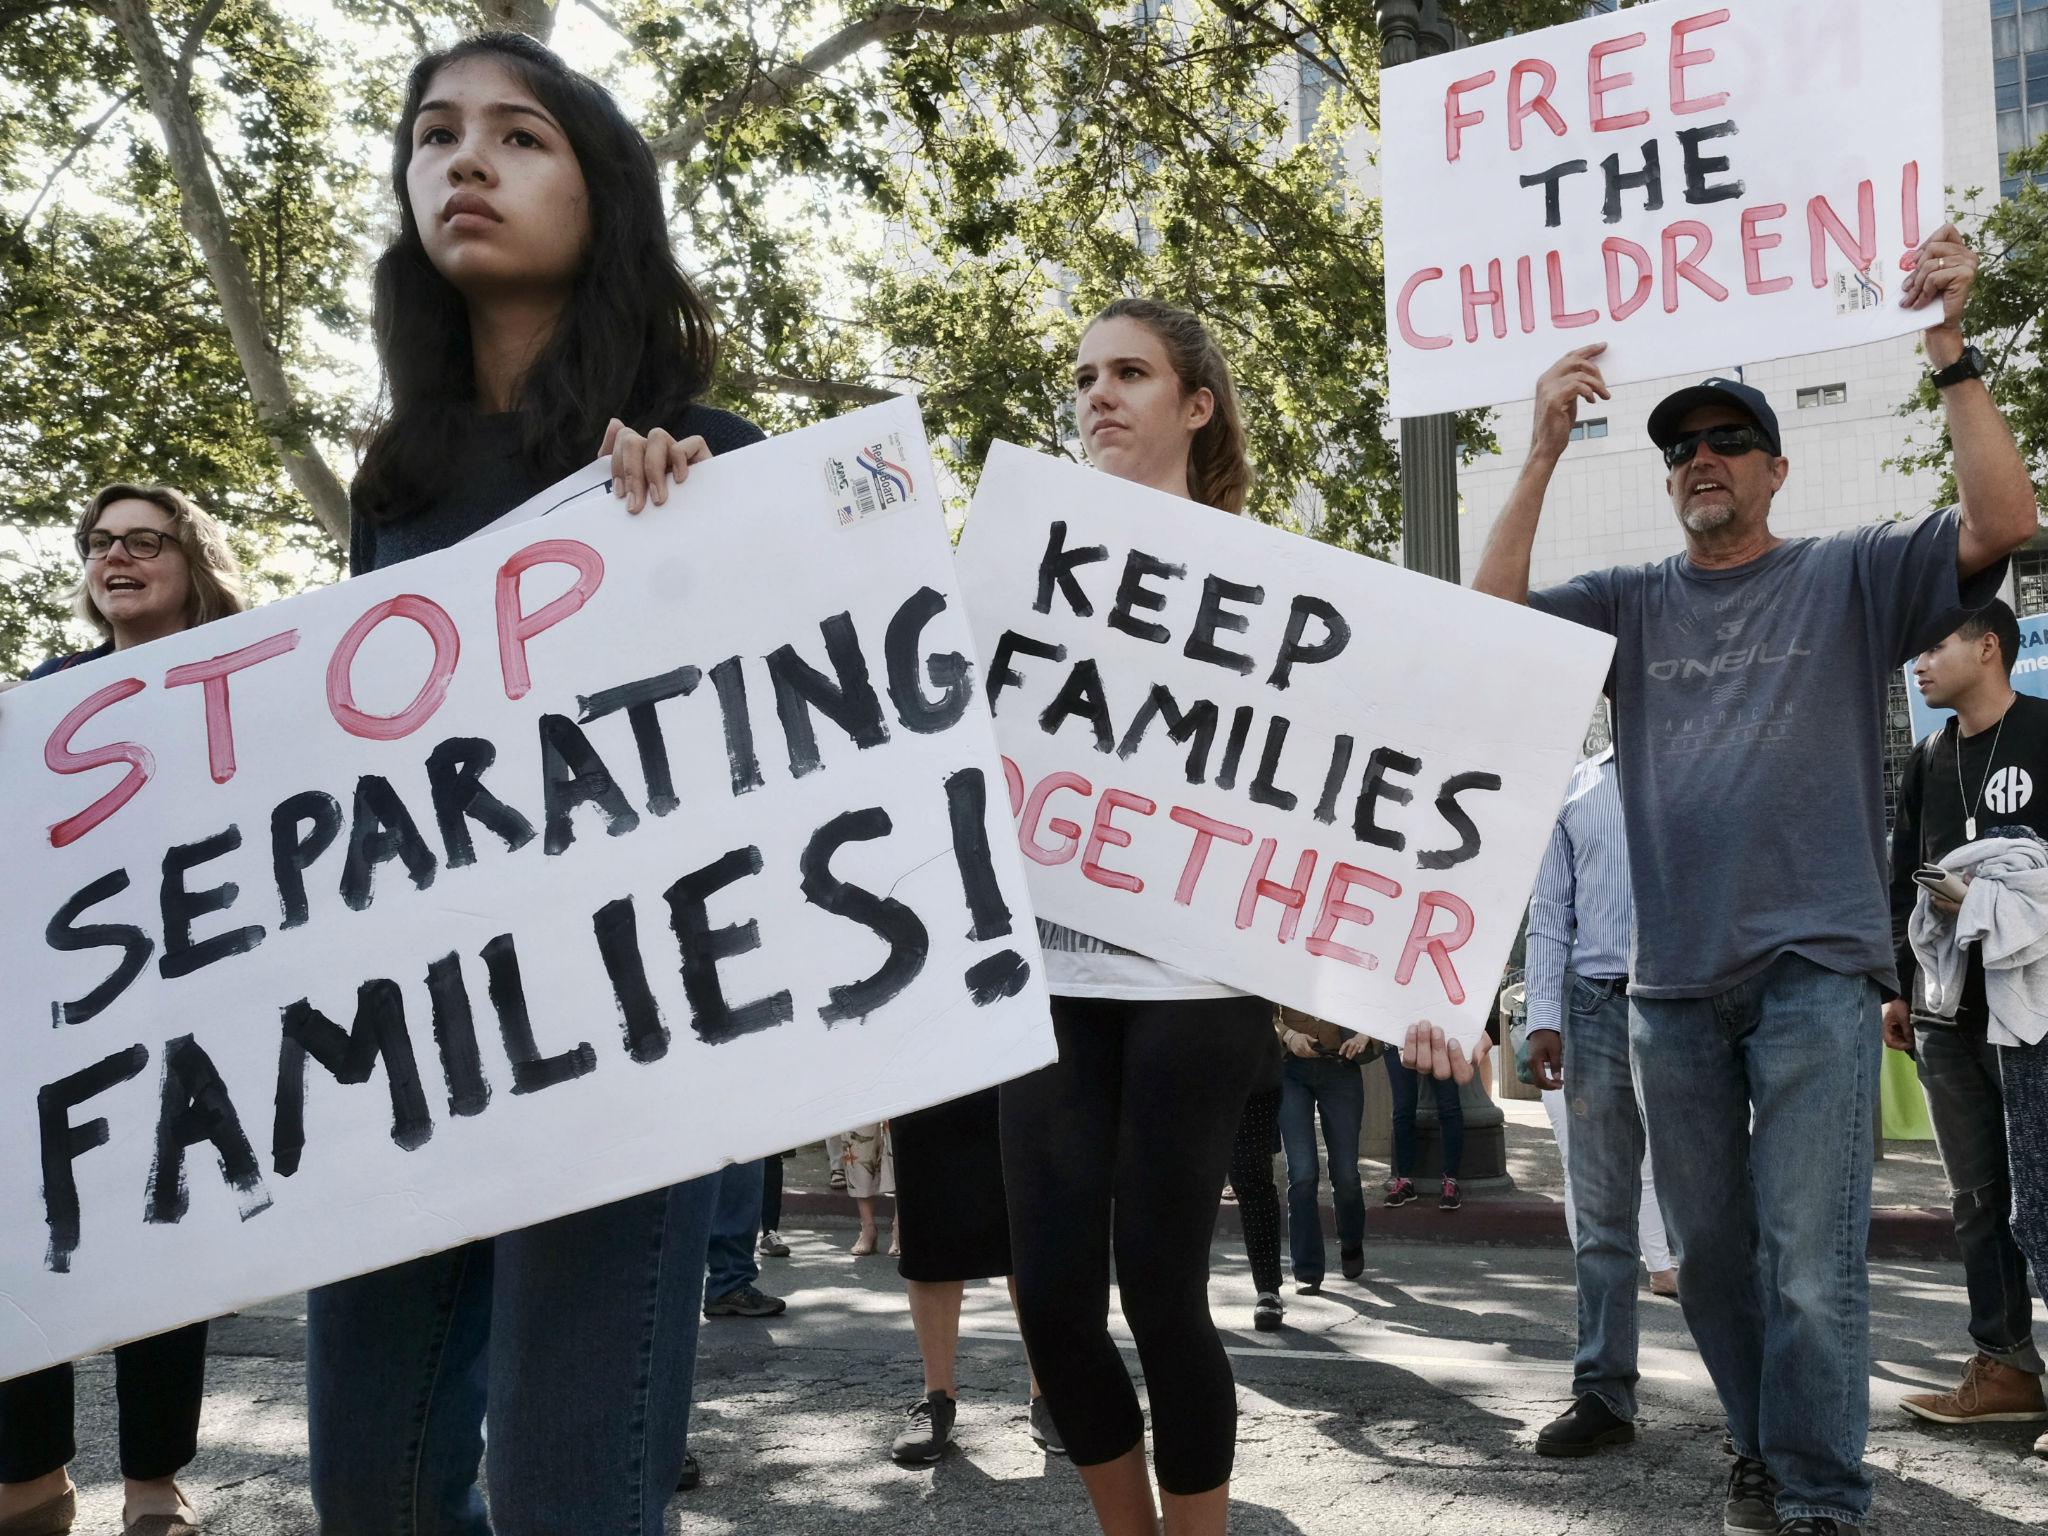 The family separation policies have sparked protests nationwide